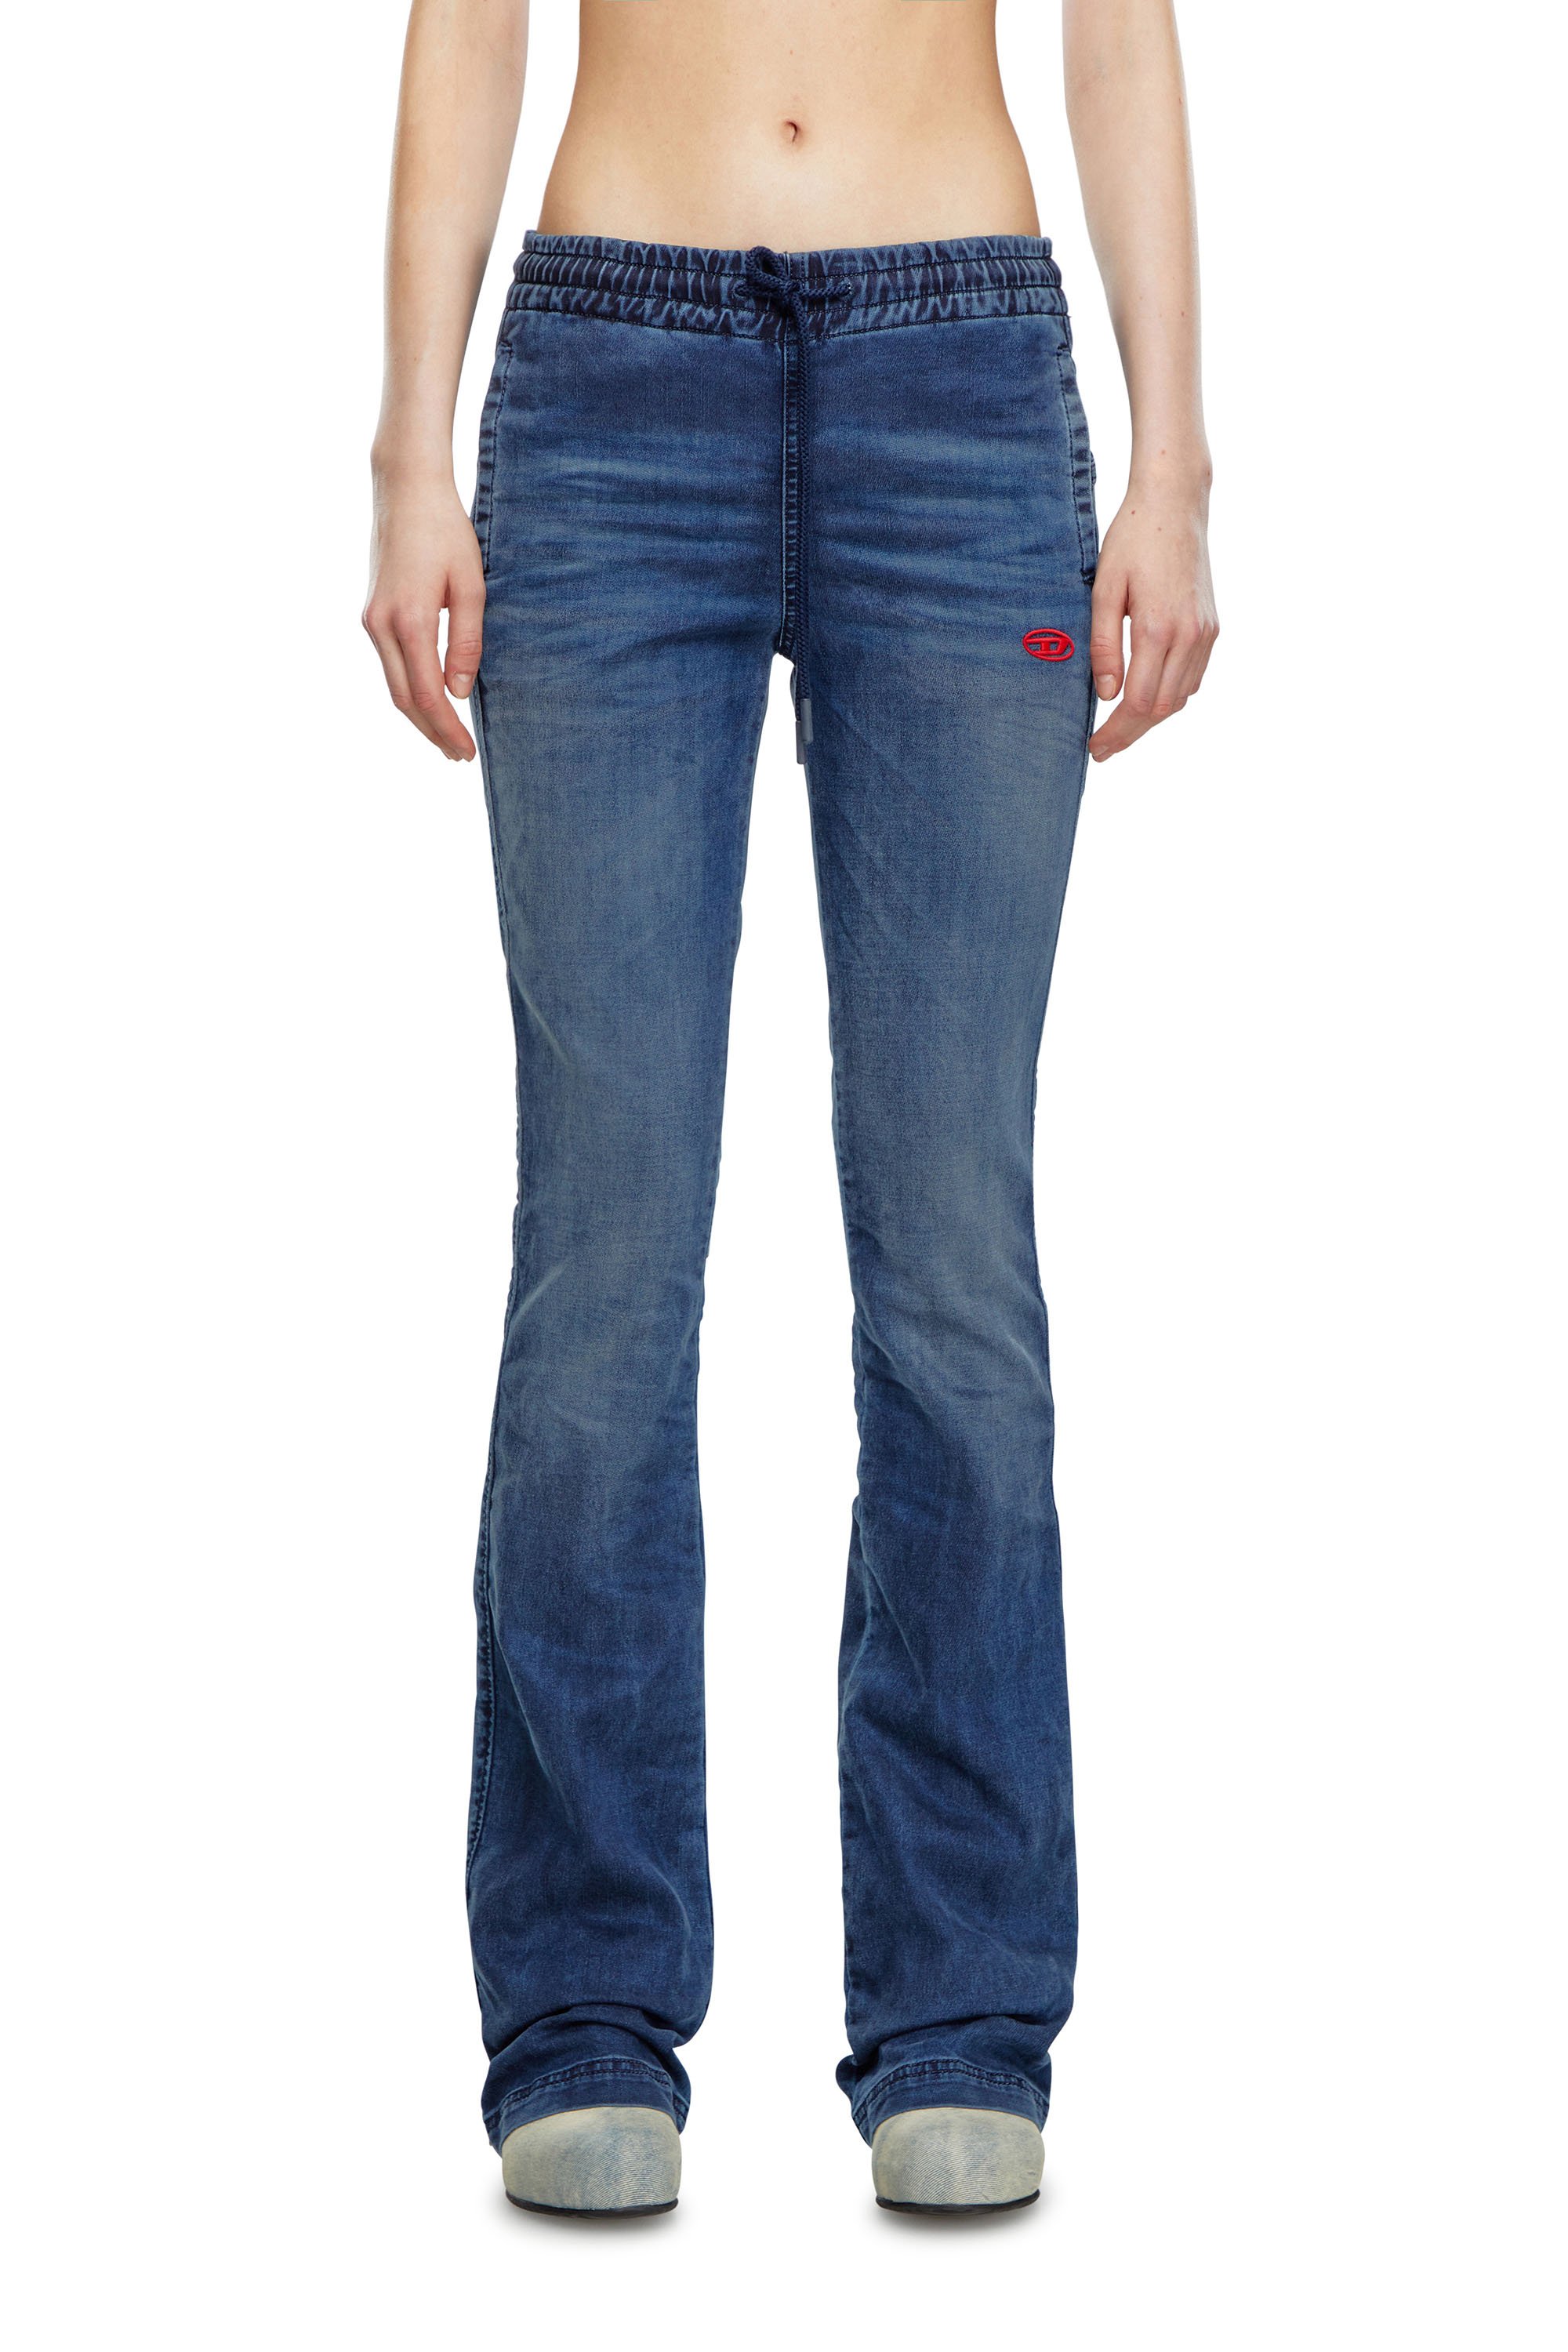 Diesel - Bootcut and Flare 2069 D-Ebbey Joggjeans® 068LX, Mujer Bootcut y Flare 2069 D-Ebbey Joggjeans® in Azul marino - Image 2